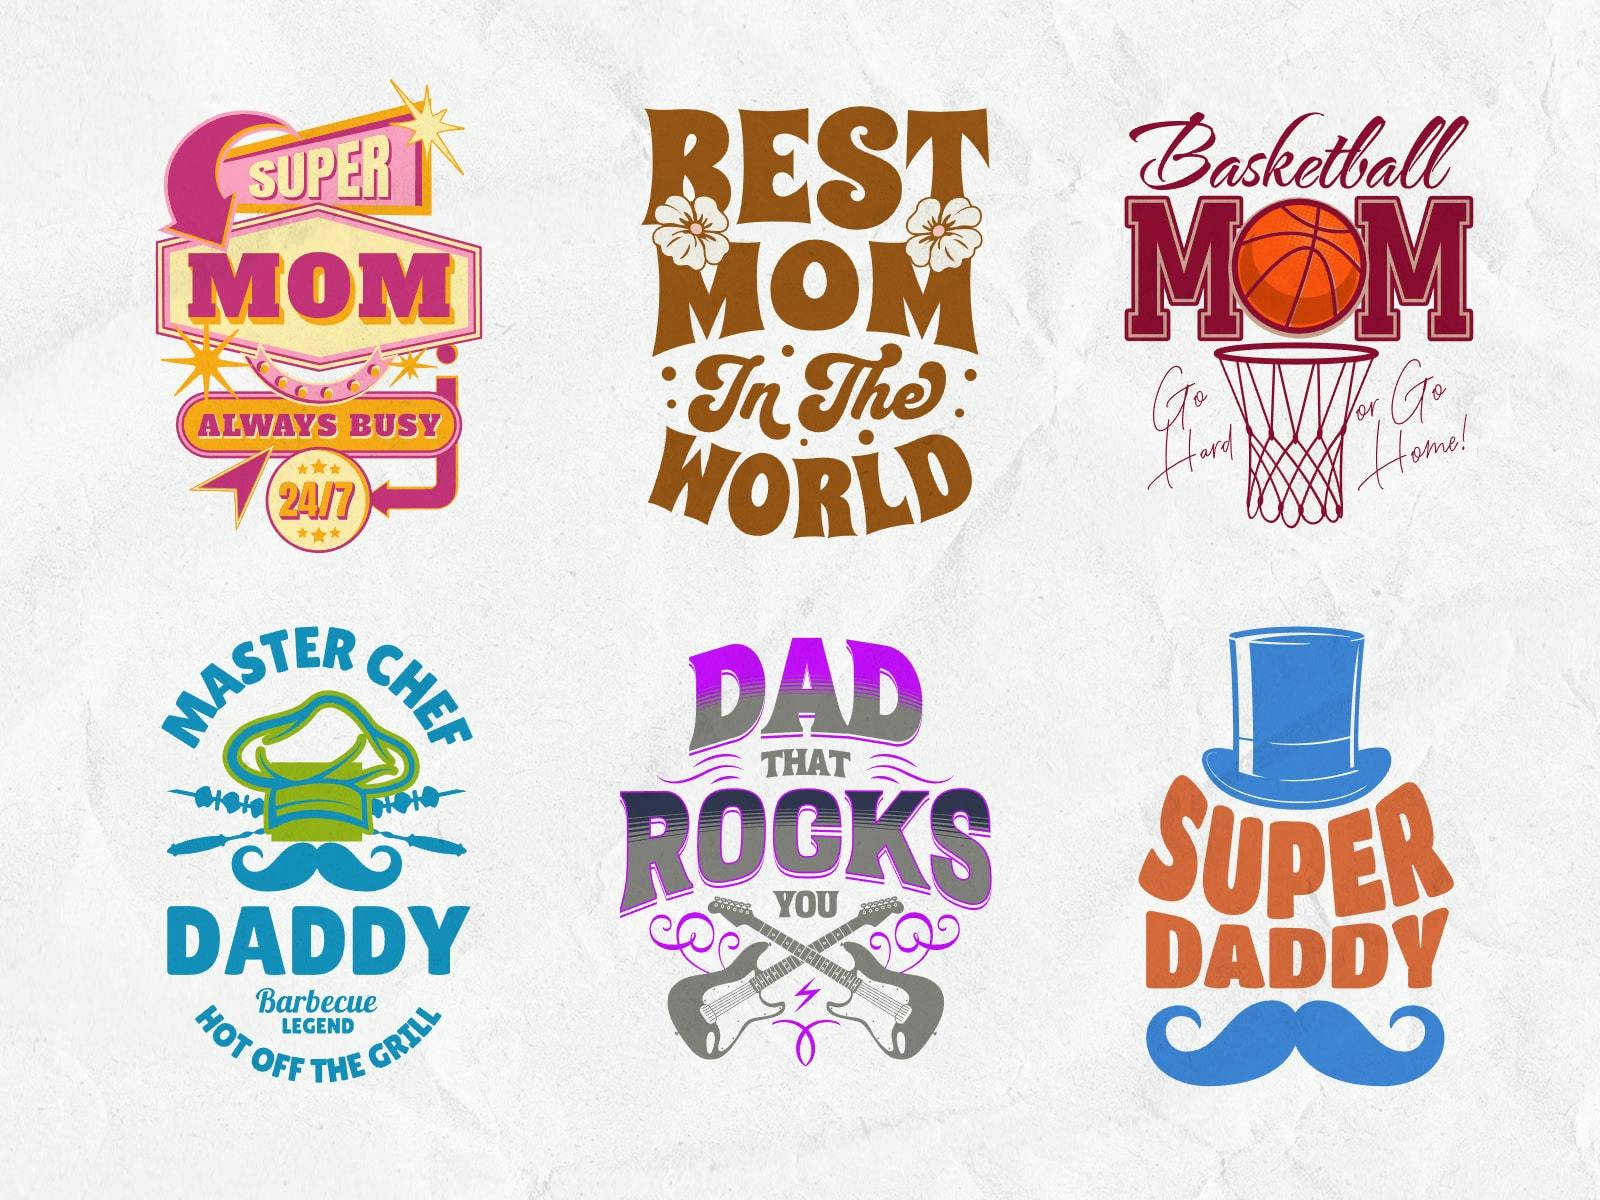 Typographic Mom & Dad T-Shirt: Collection of typographic Mom & Dad-themed T-shirt designs